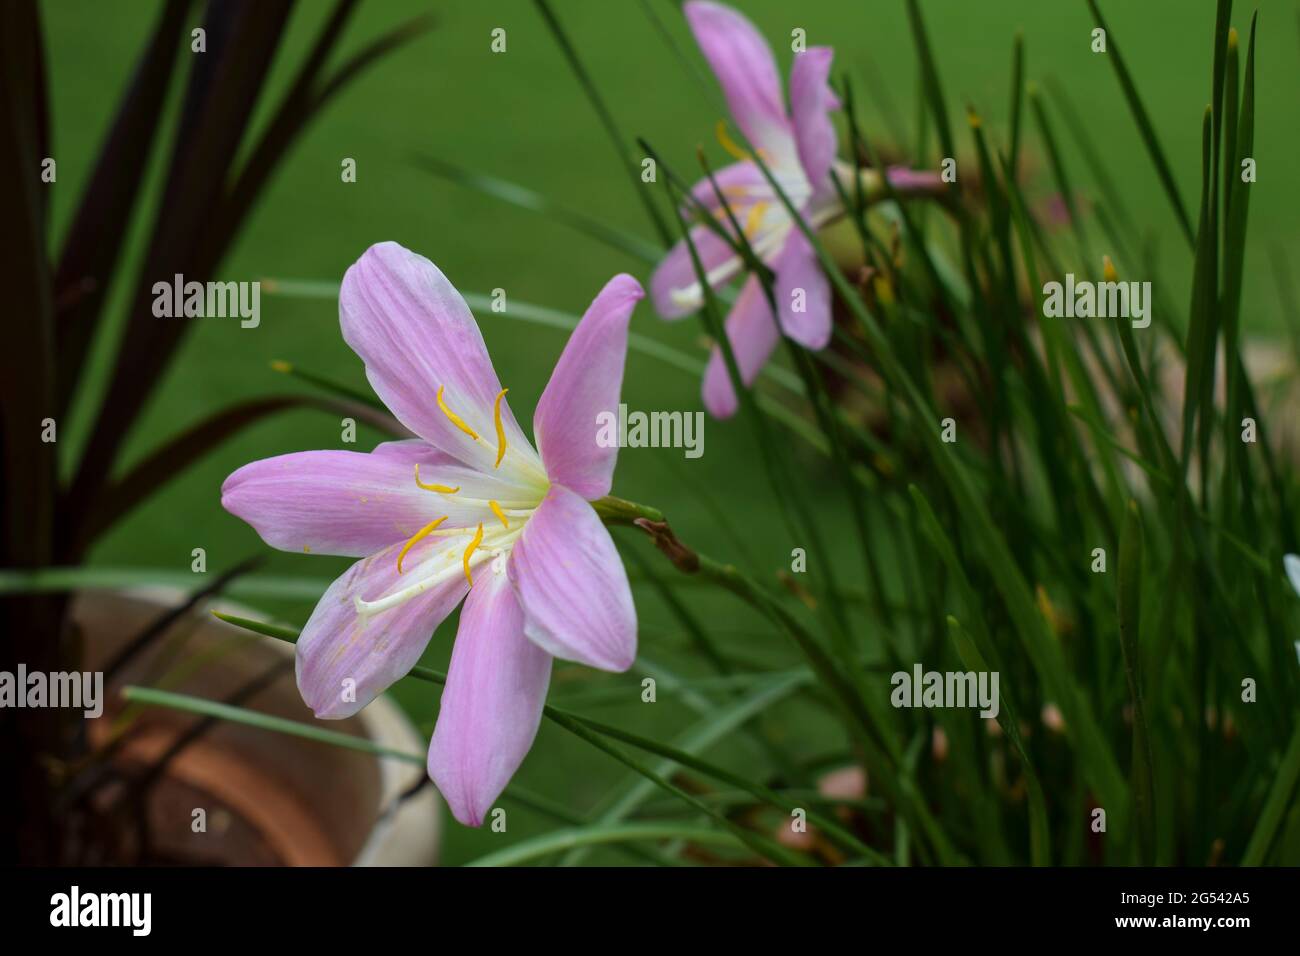 Rain lily flower in pink color also known as Zephyranthes carinata. Indian flowering plants Stock Photo